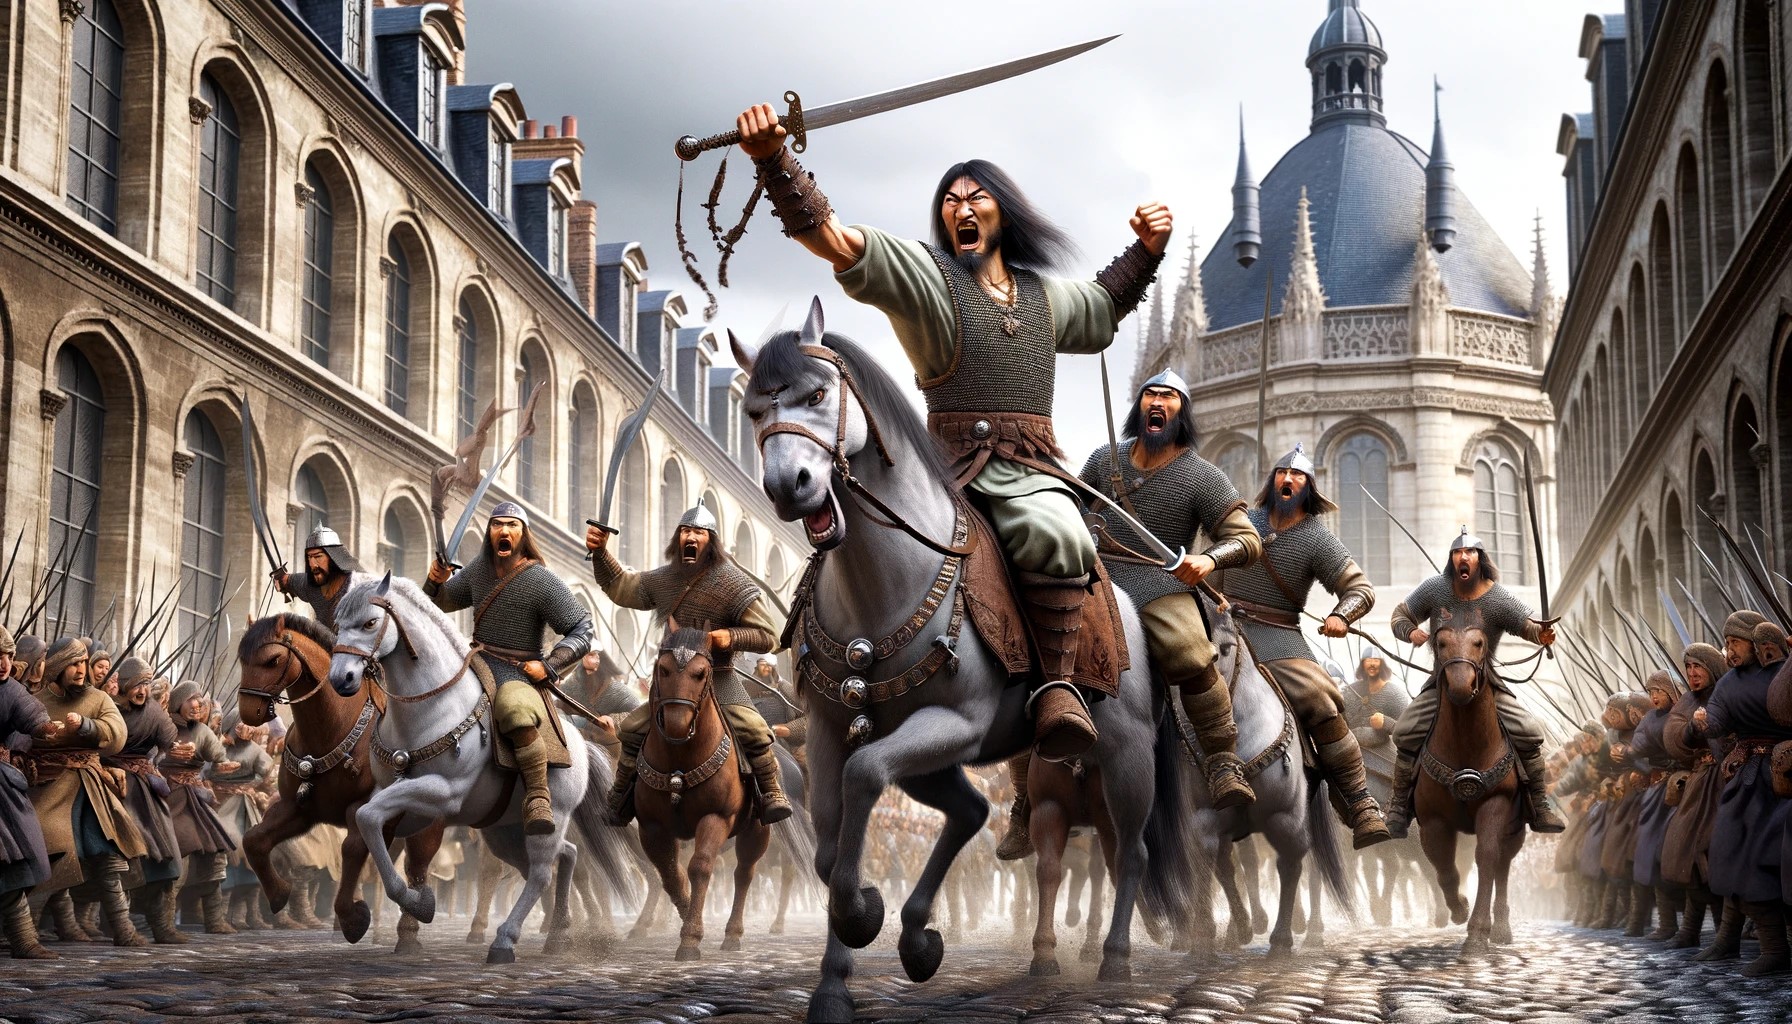 Historical counterfactual: Mongols invading the Sorbonne in the 13th century